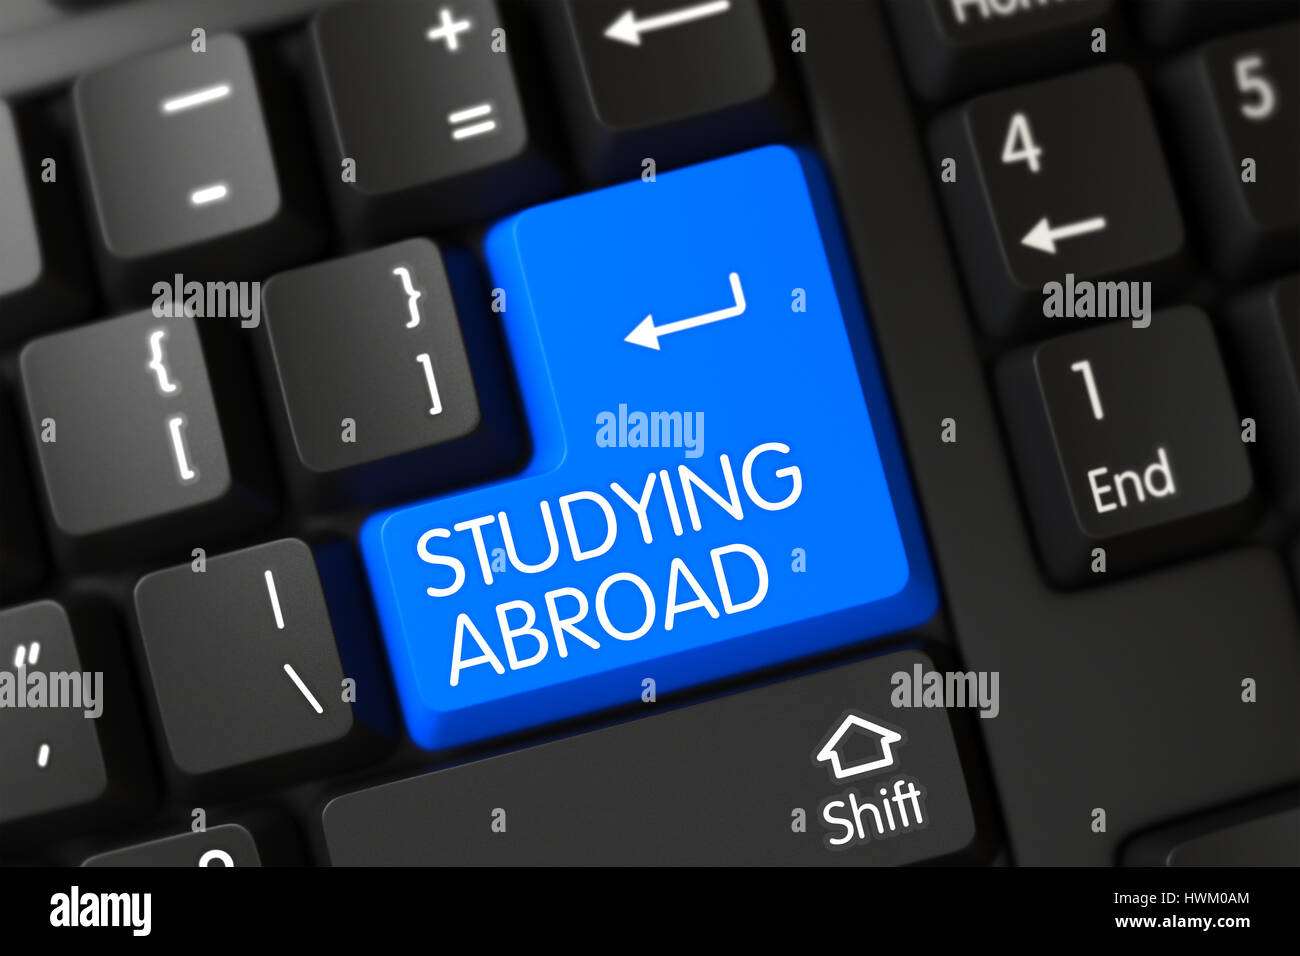 Keyboard with Blue Keypad - Studying Abroad. 3d. Stock Photo